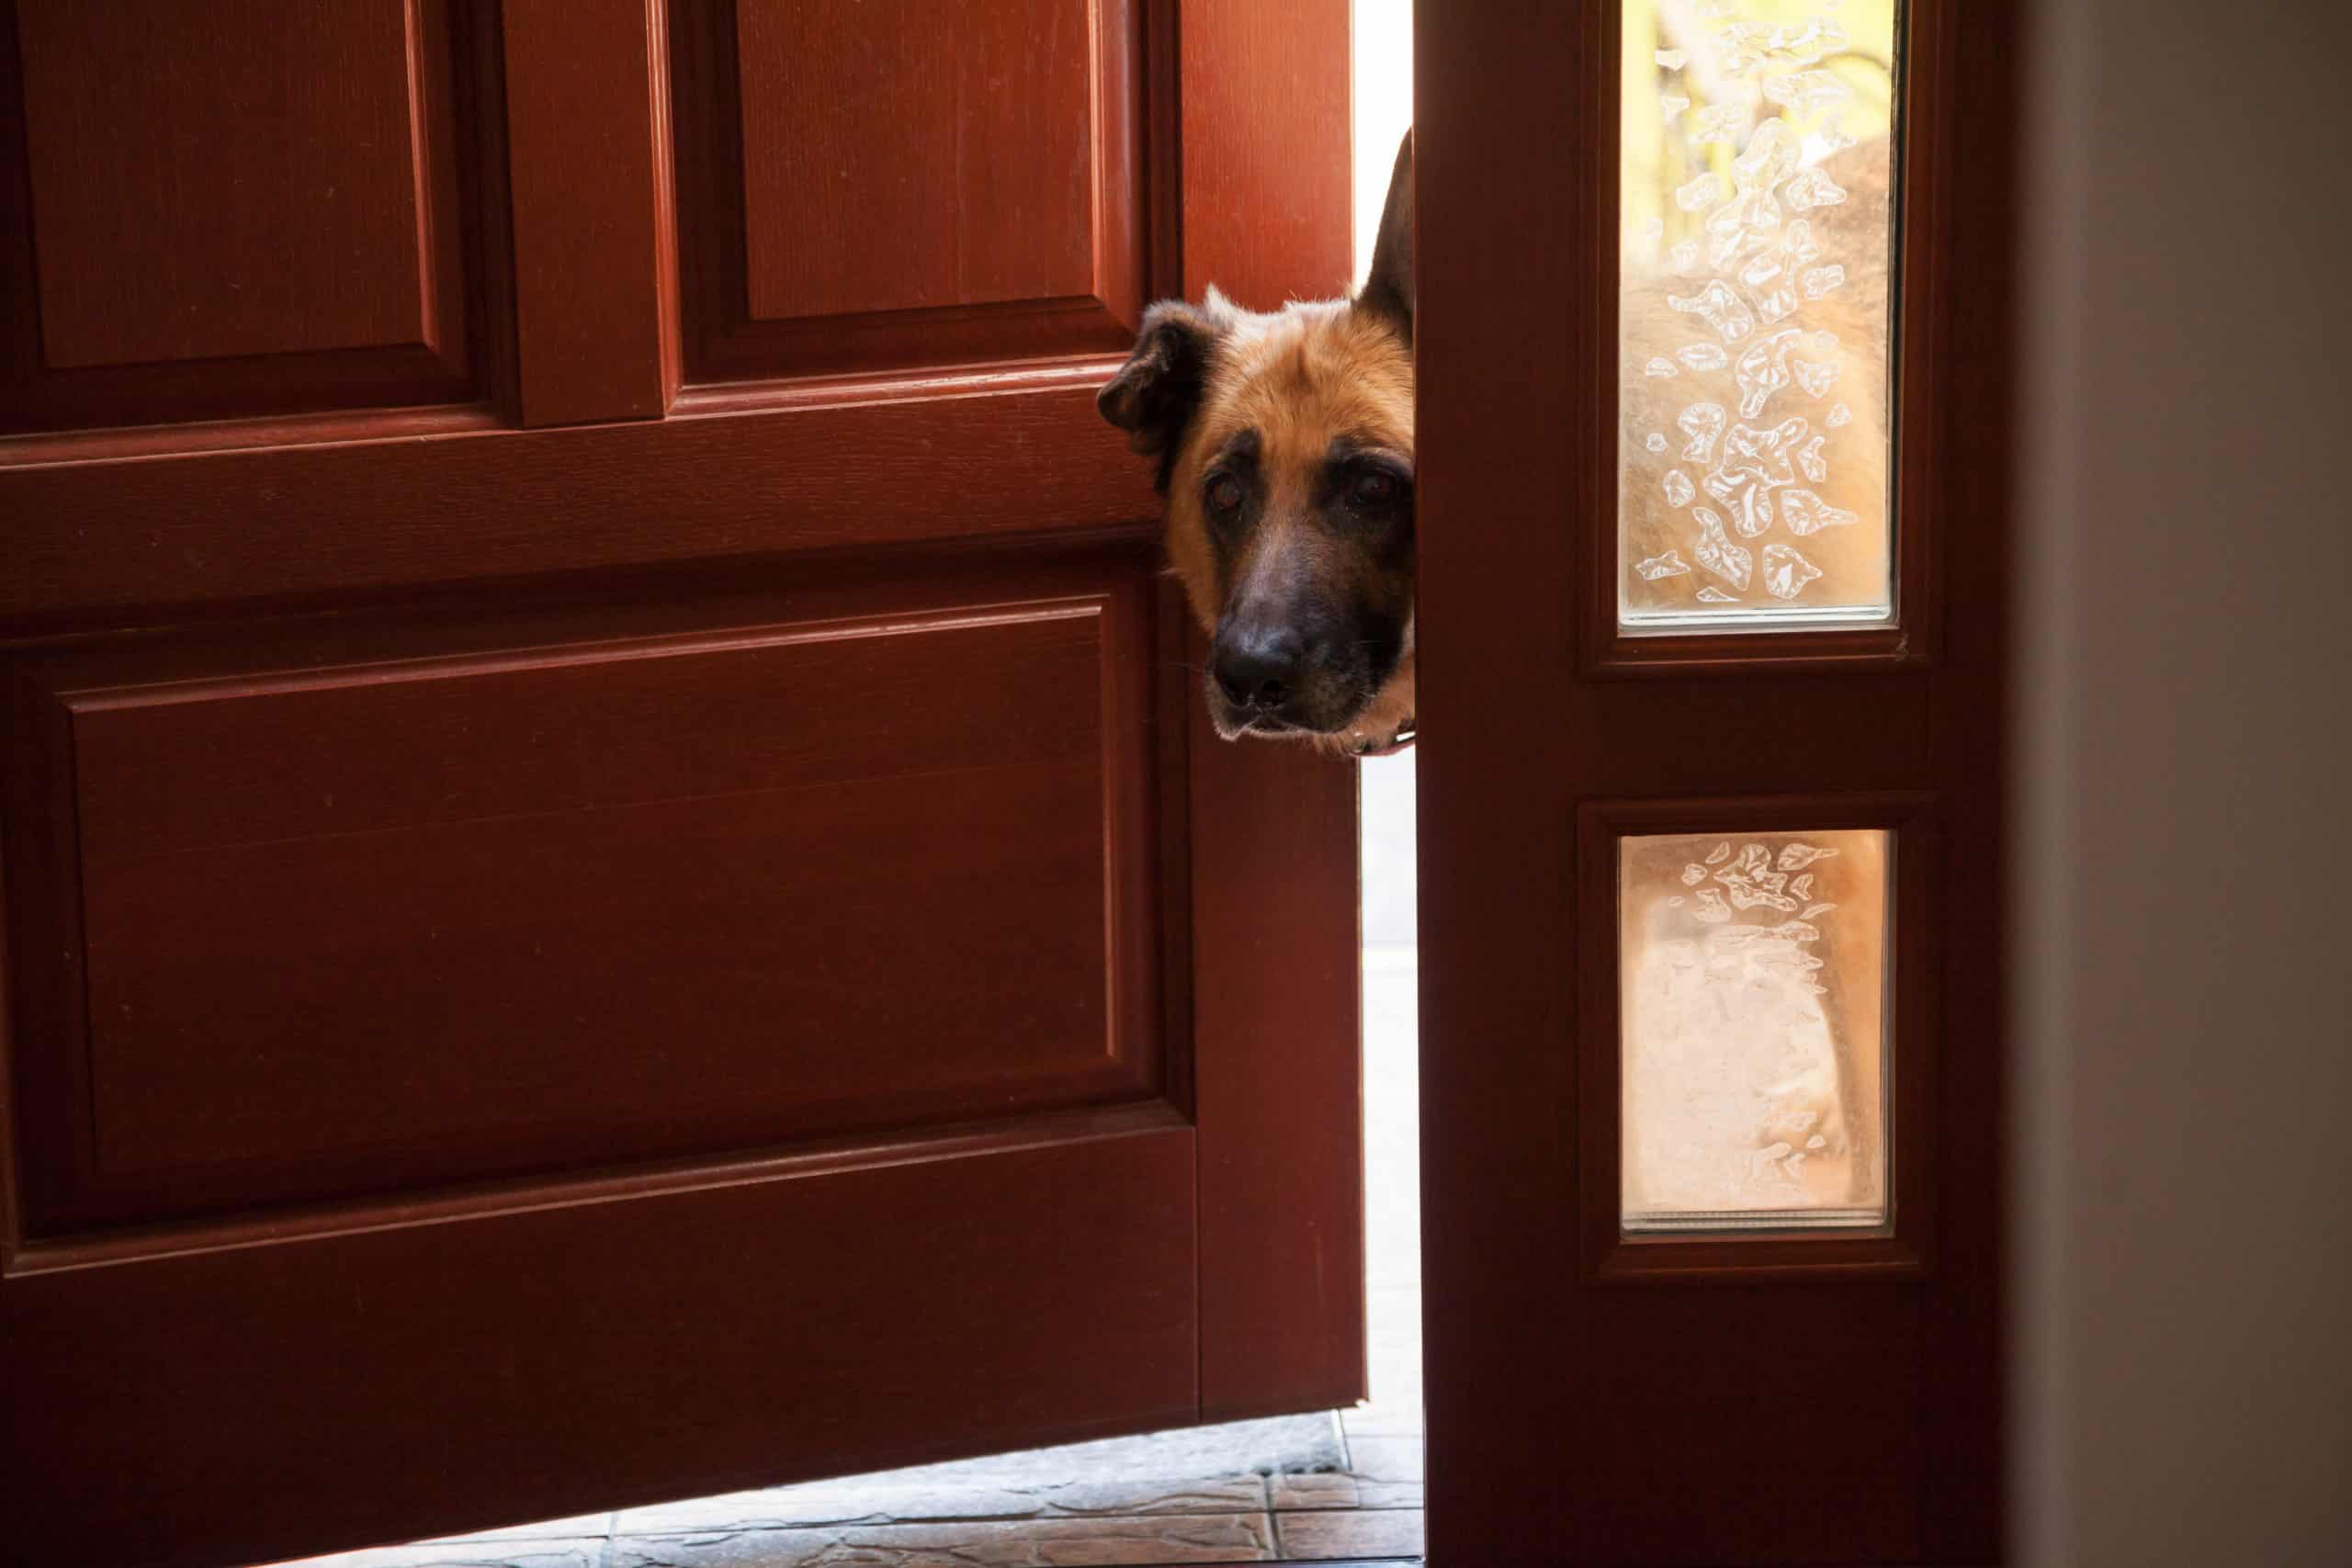 How to stop my dog from peeing on the door?